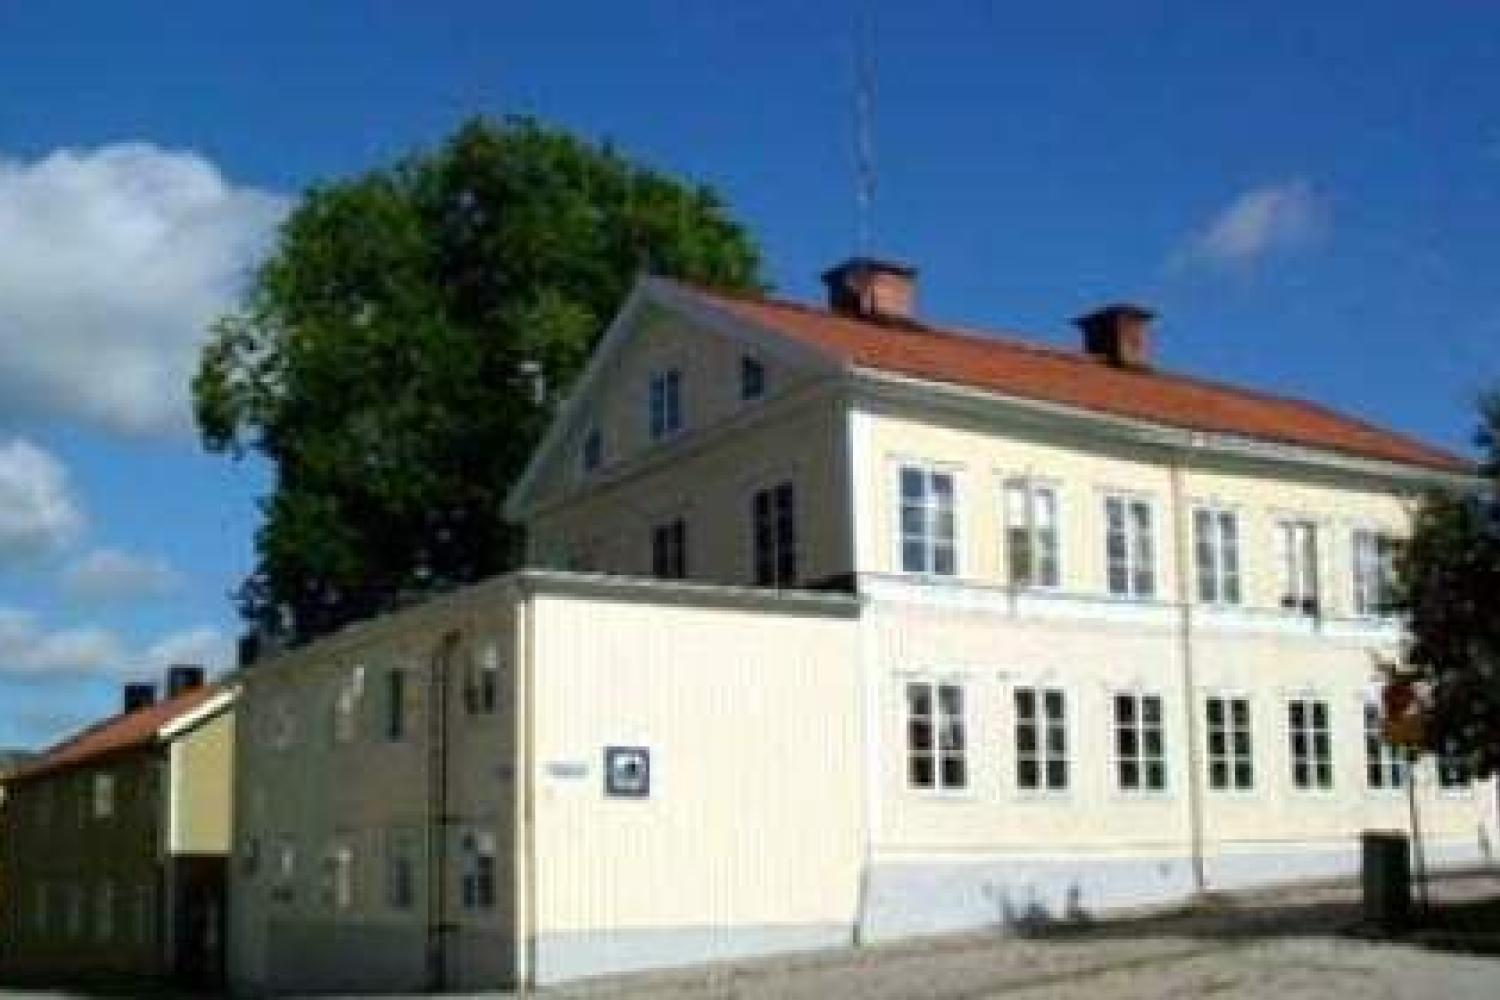 STF Hostel in the old town of Gävle